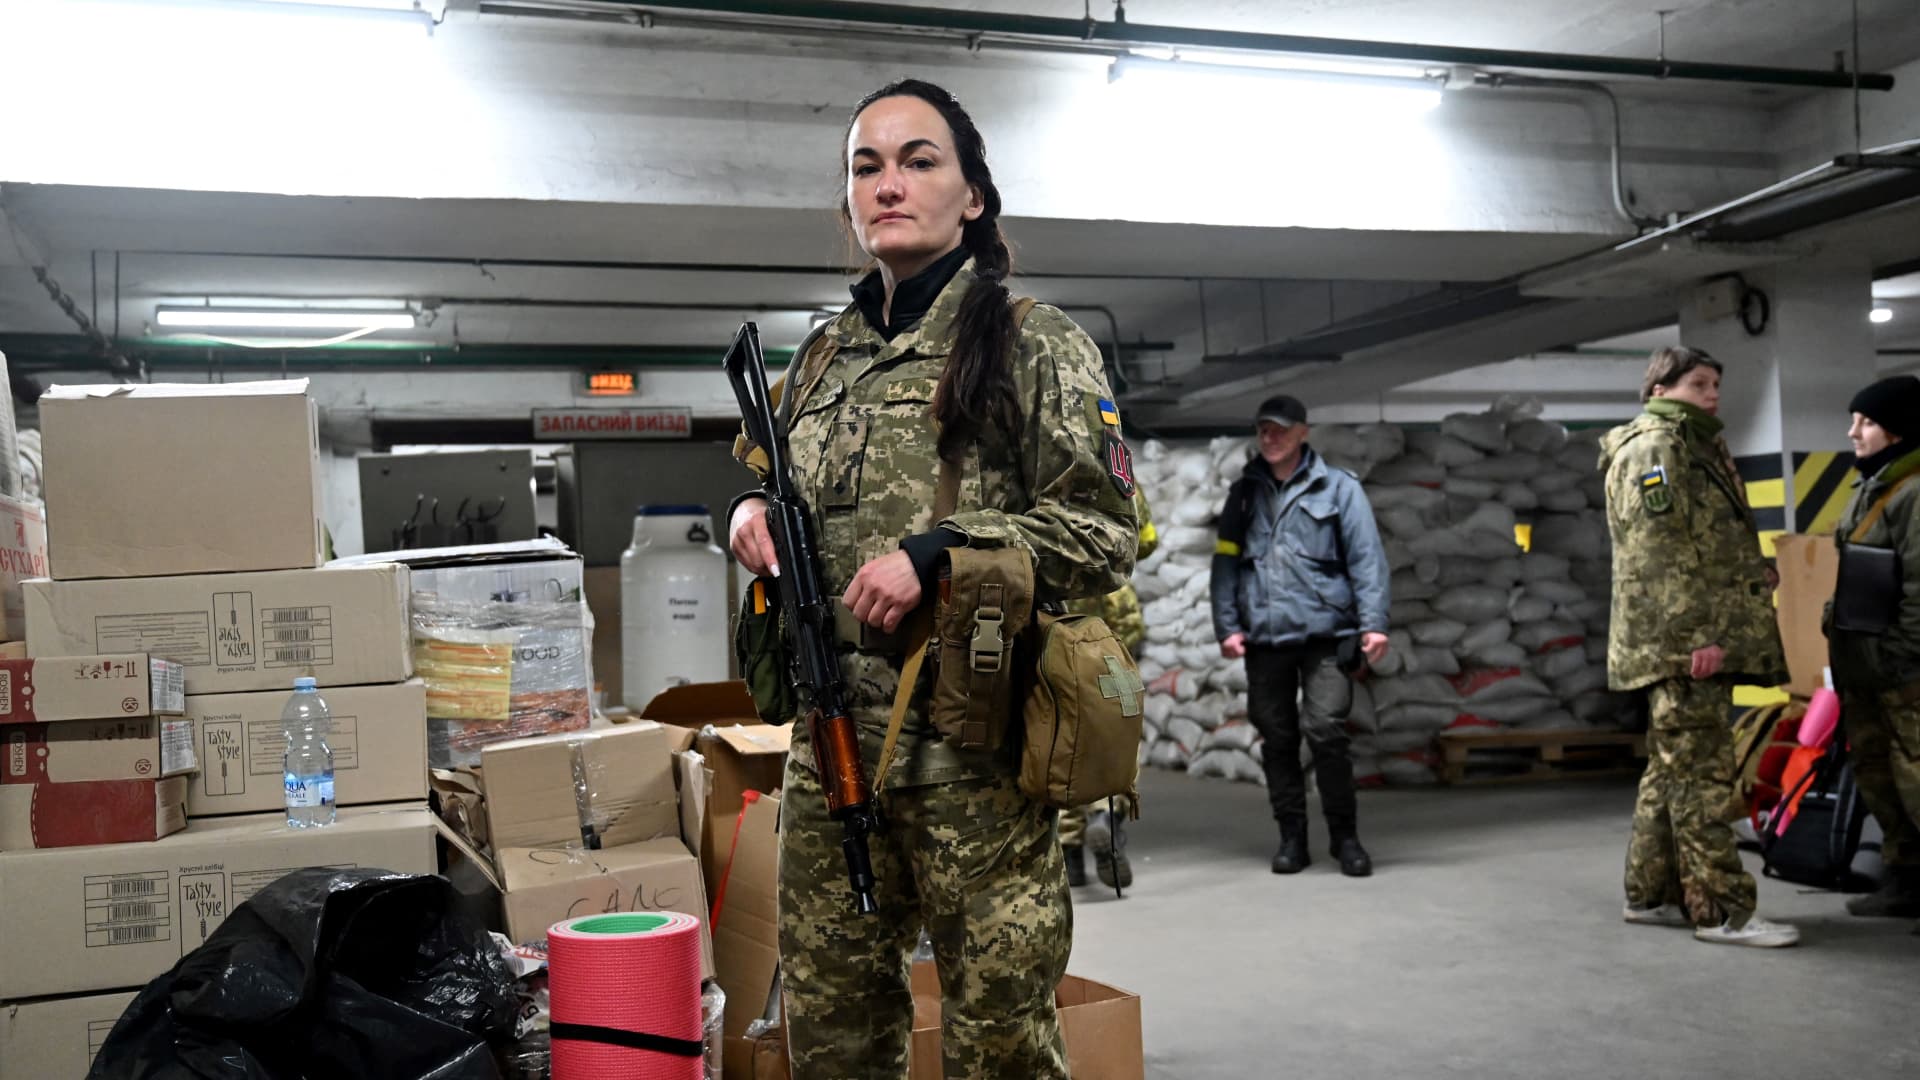 Iryna Sergeyeva, Ukraine's first female volunteer fighter to get a full military contract of the Territorial Defense Forces of Ukraine, the military reserve of the Armed Forces of Ukraine, holds her Kalashnikov mashine-gun as she attends a military training in an underground garage that has been converted into a training and logistics base in Kyiv, on March 11, 2022.